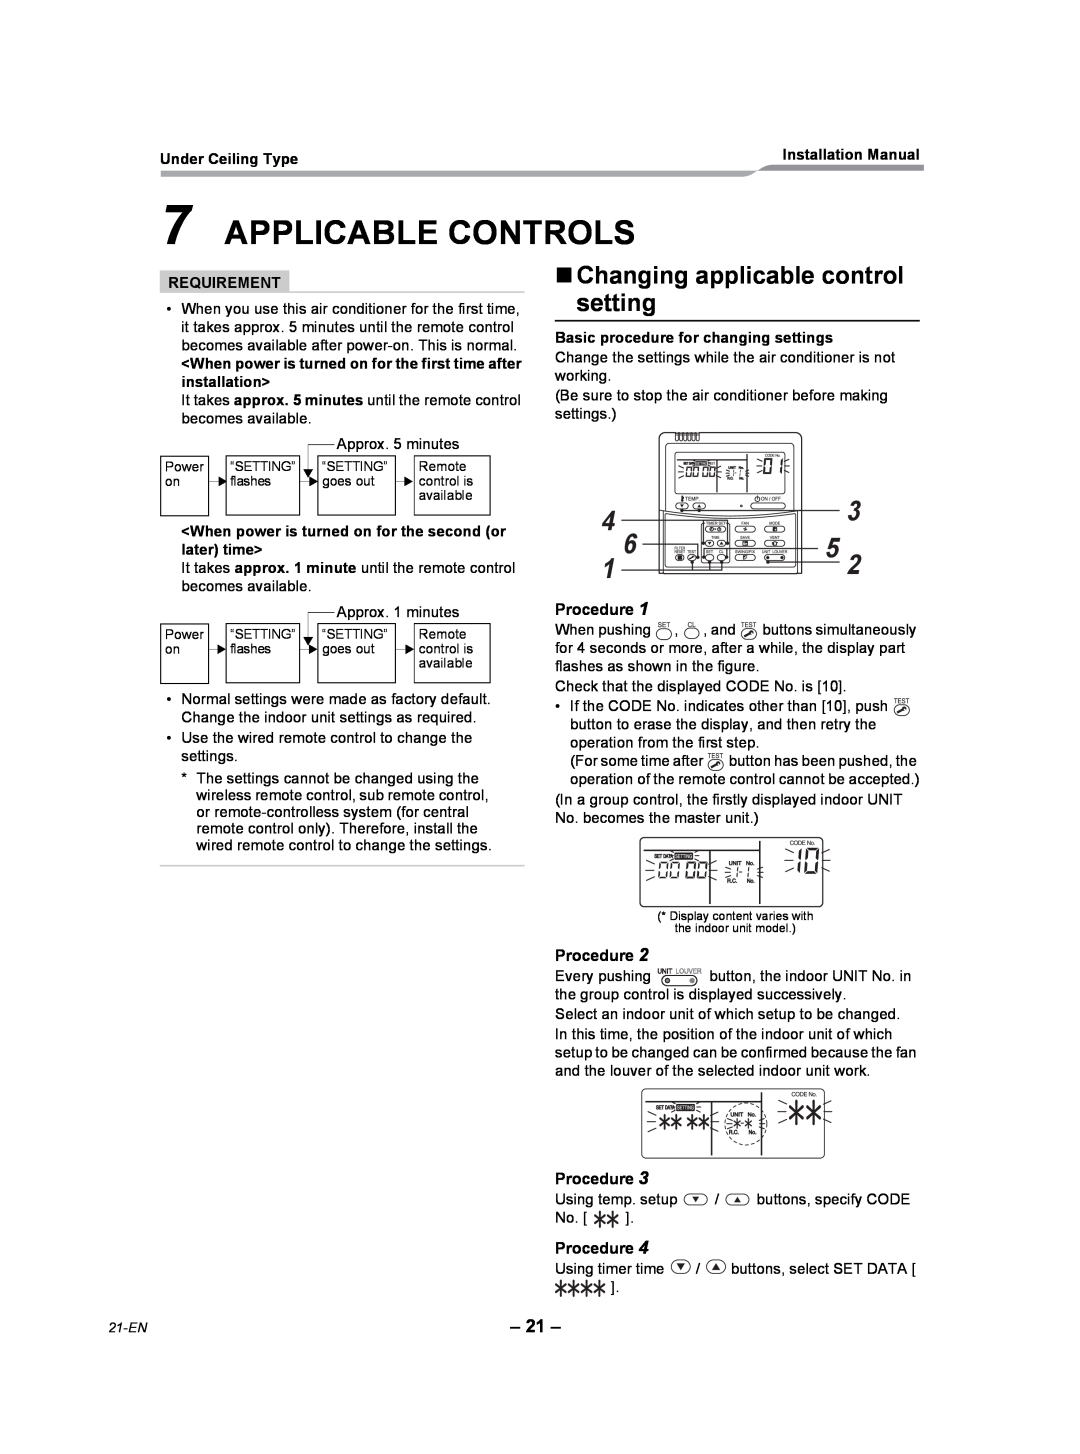 Toshiba RAV-SP180CT-UL Applicable Controls, „Changing applicable control setting, Procedure, Under Ceiling Type 